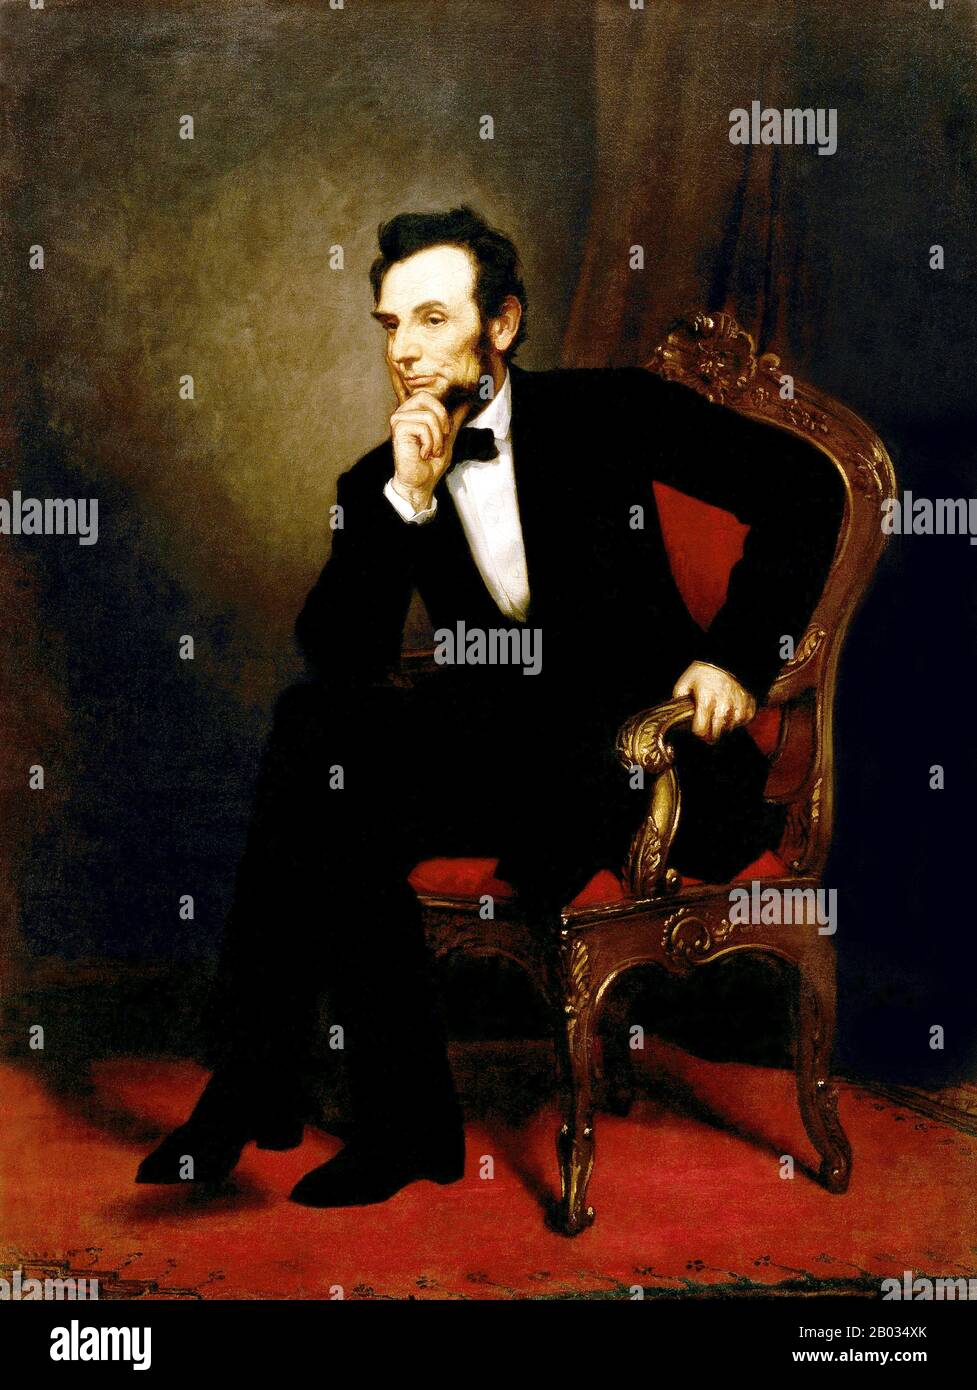 Abraham Lincoln (February 12, 1809 – April 15, 1865) was the 16th president of the United States, serving from March 1861 until his assassination in April 1865.  Lincoln led the United States through its Civil War—its bloodiest war and its greatest moral, constitutional and political crisis. In doing so, he preserved the Union, abolished slavery, strengthened the federal government, and modernized the economy. Stock Photo